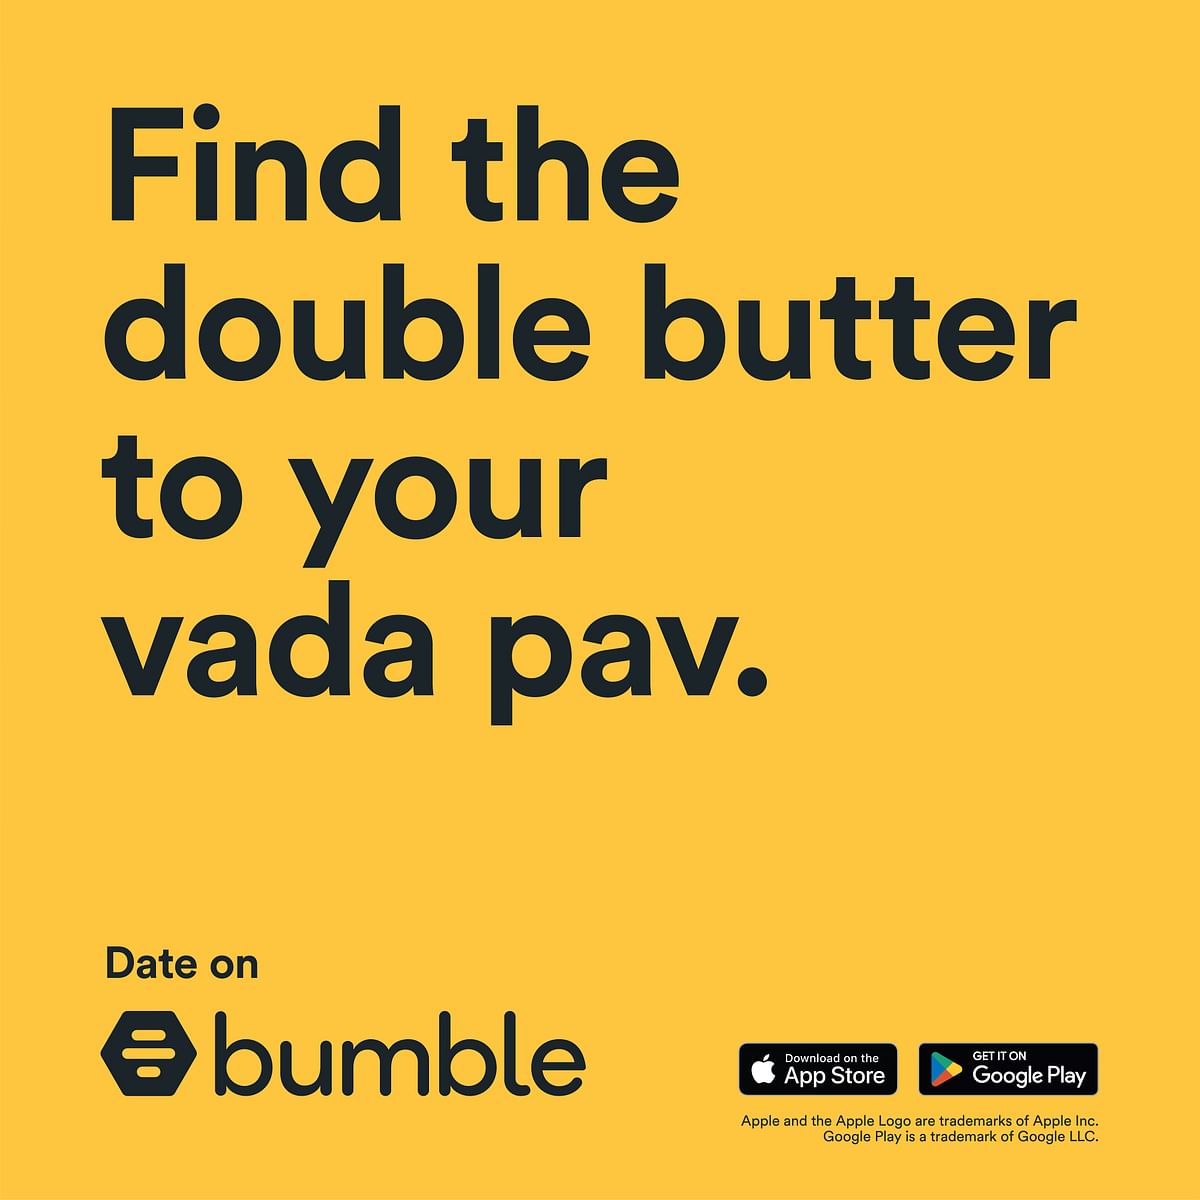 Bumble launches New Out Of Home Campaign in India